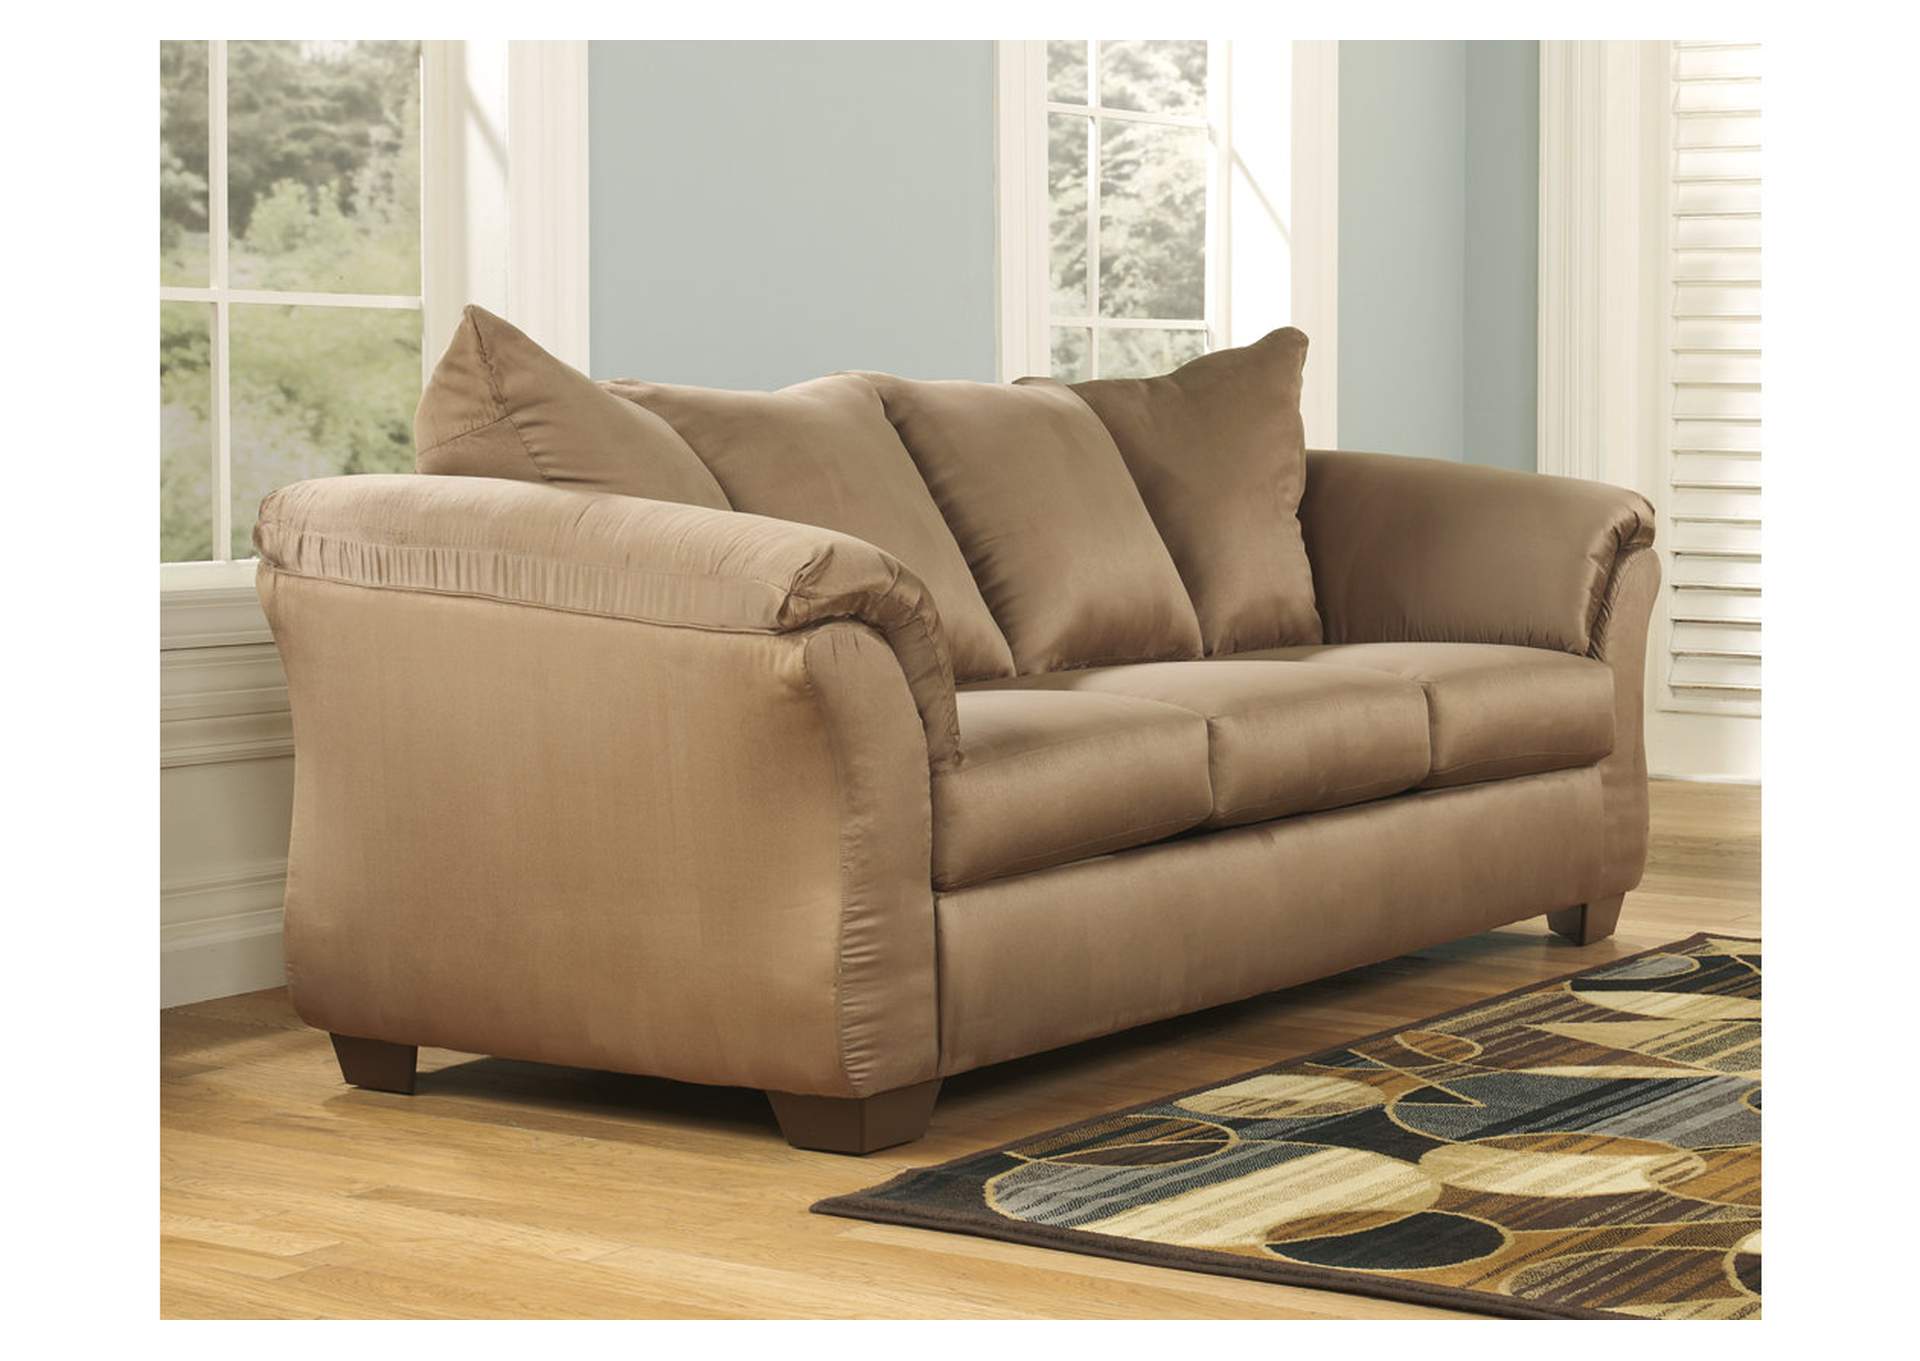 Darcy Sofa,In-Store Products